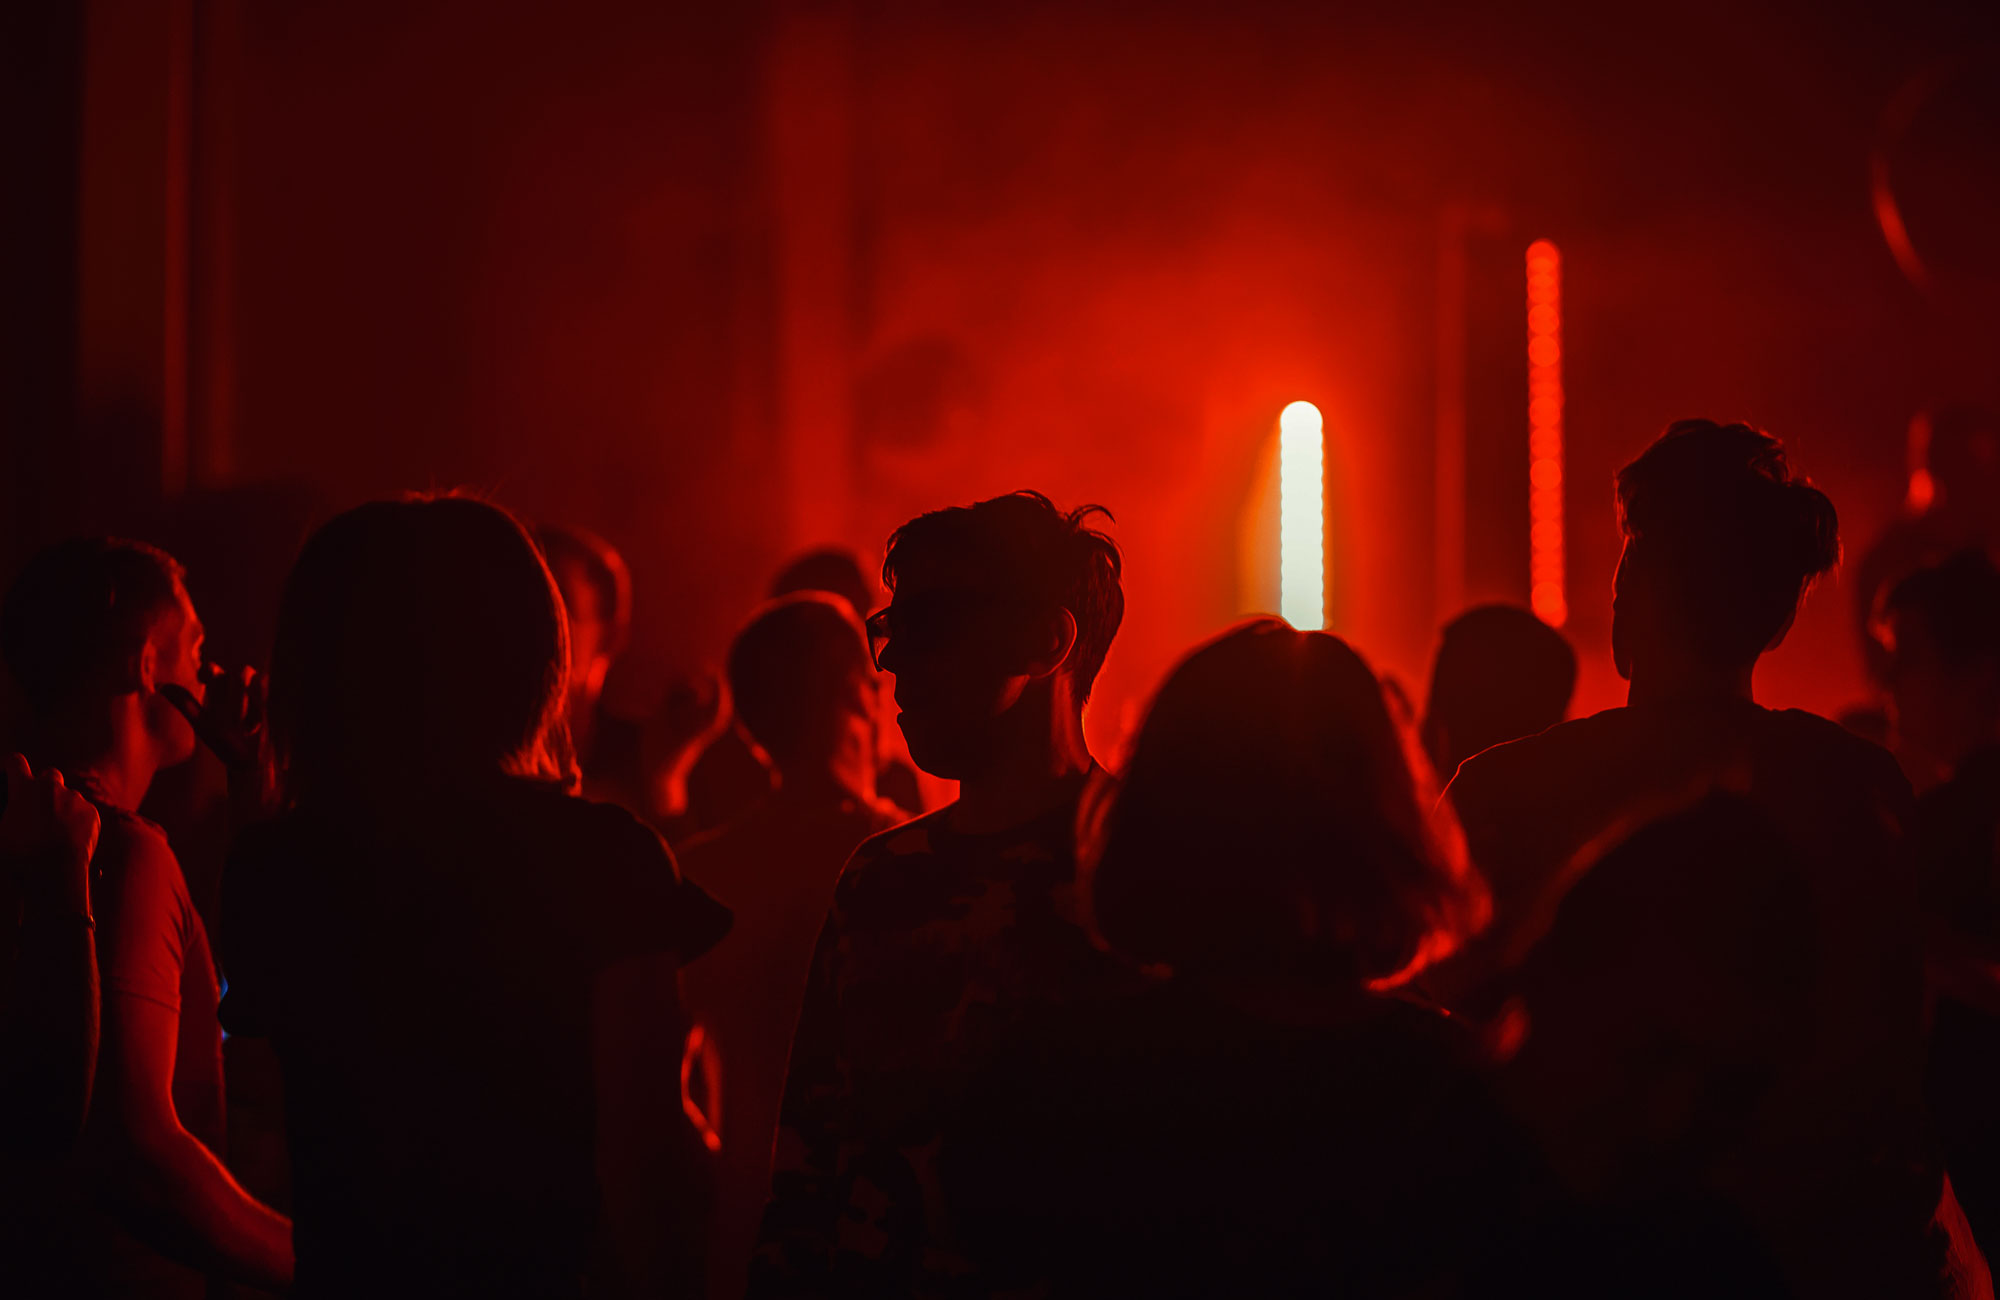 Solo Travel Beginners Guide - Party at night with red neon lights - Blog - KILROY